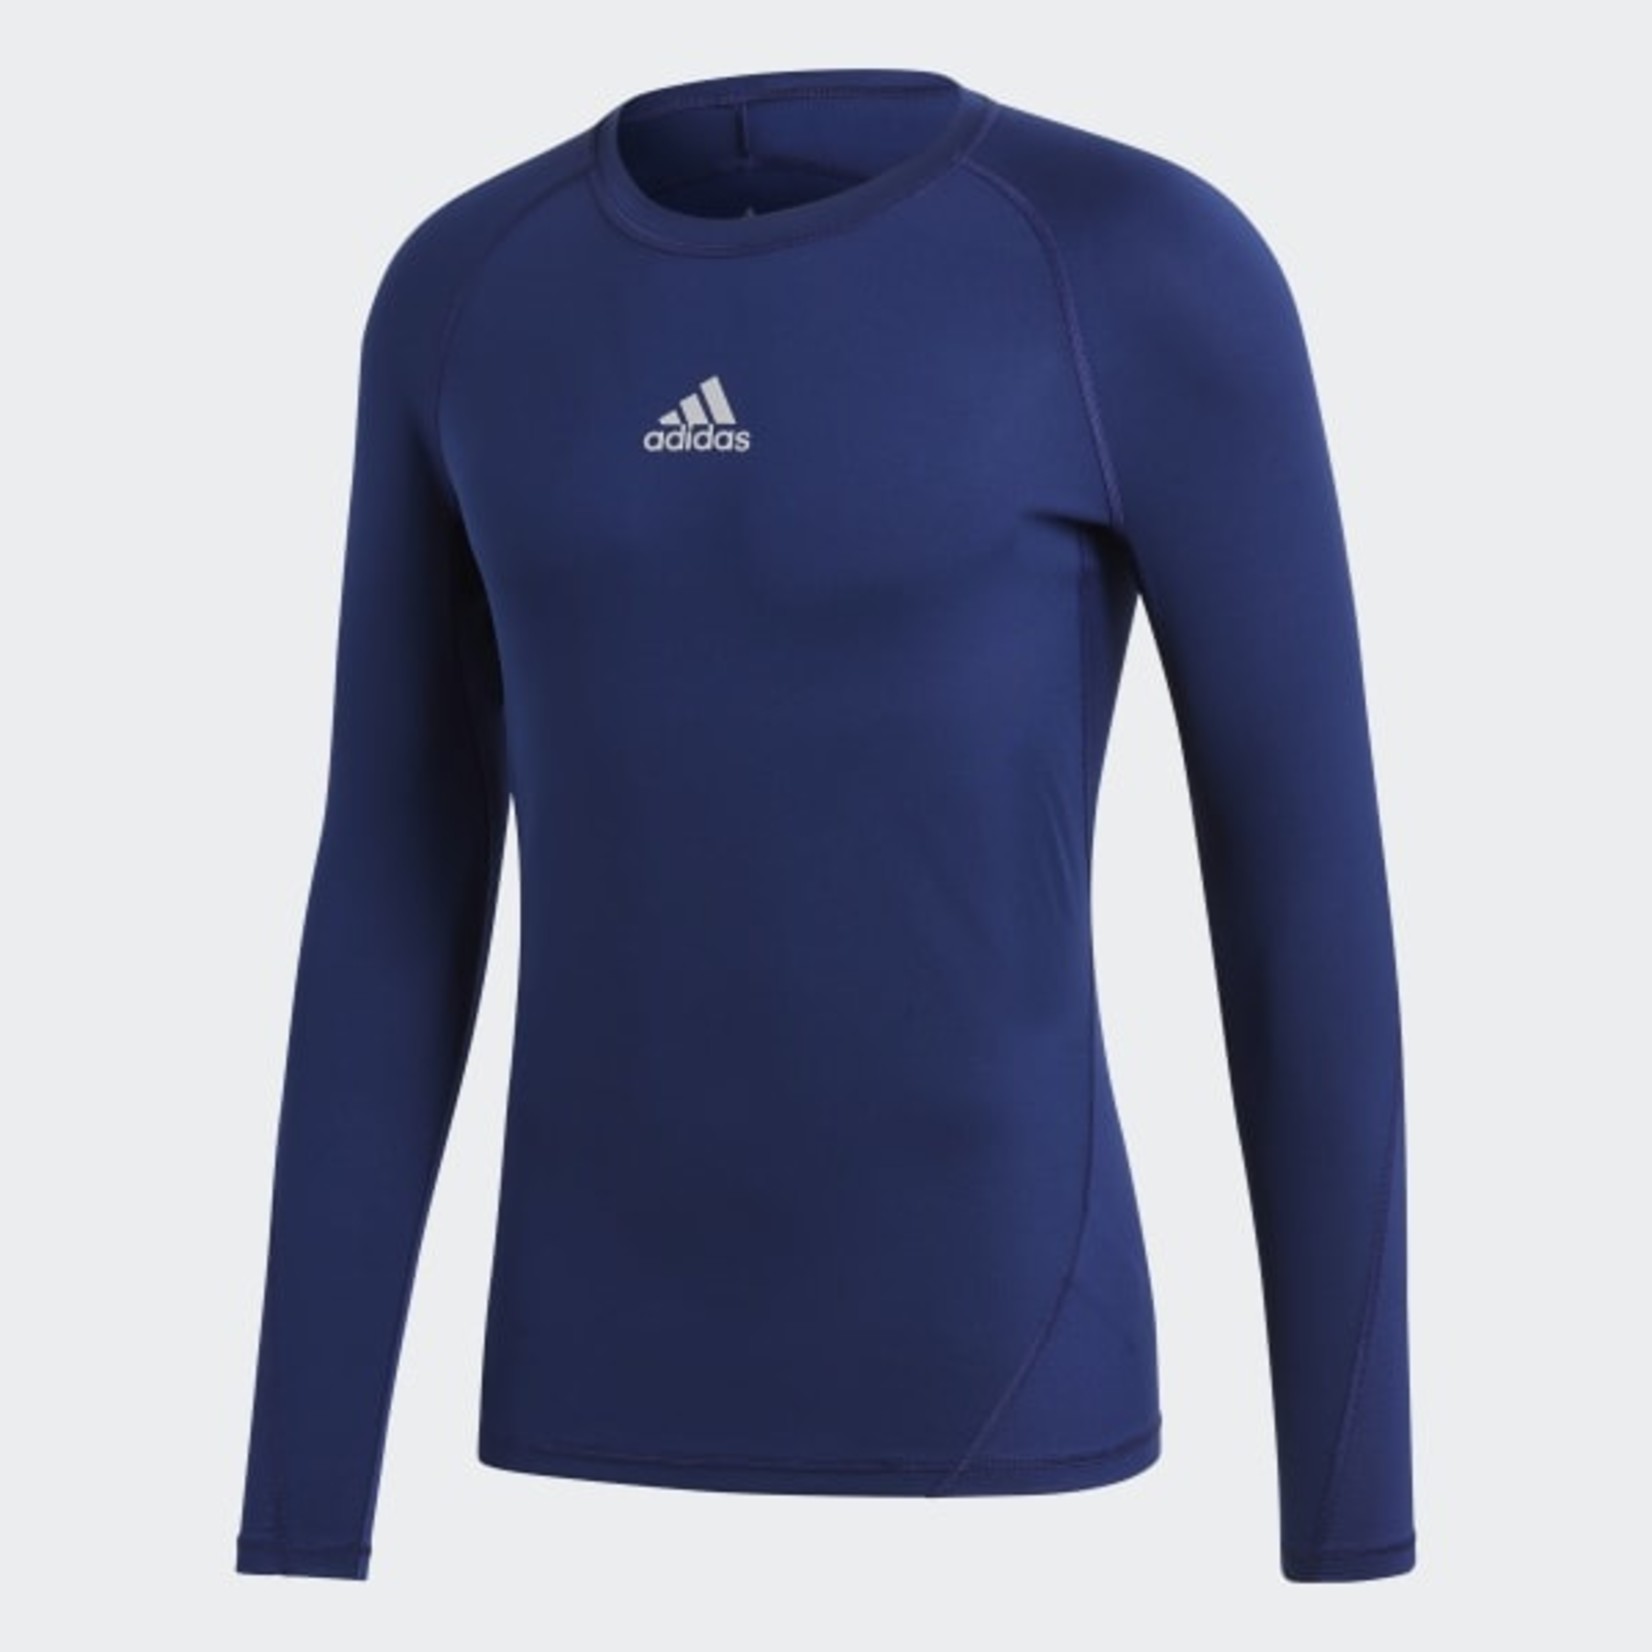 Adidas Compression Navy Long Sleeve Adult